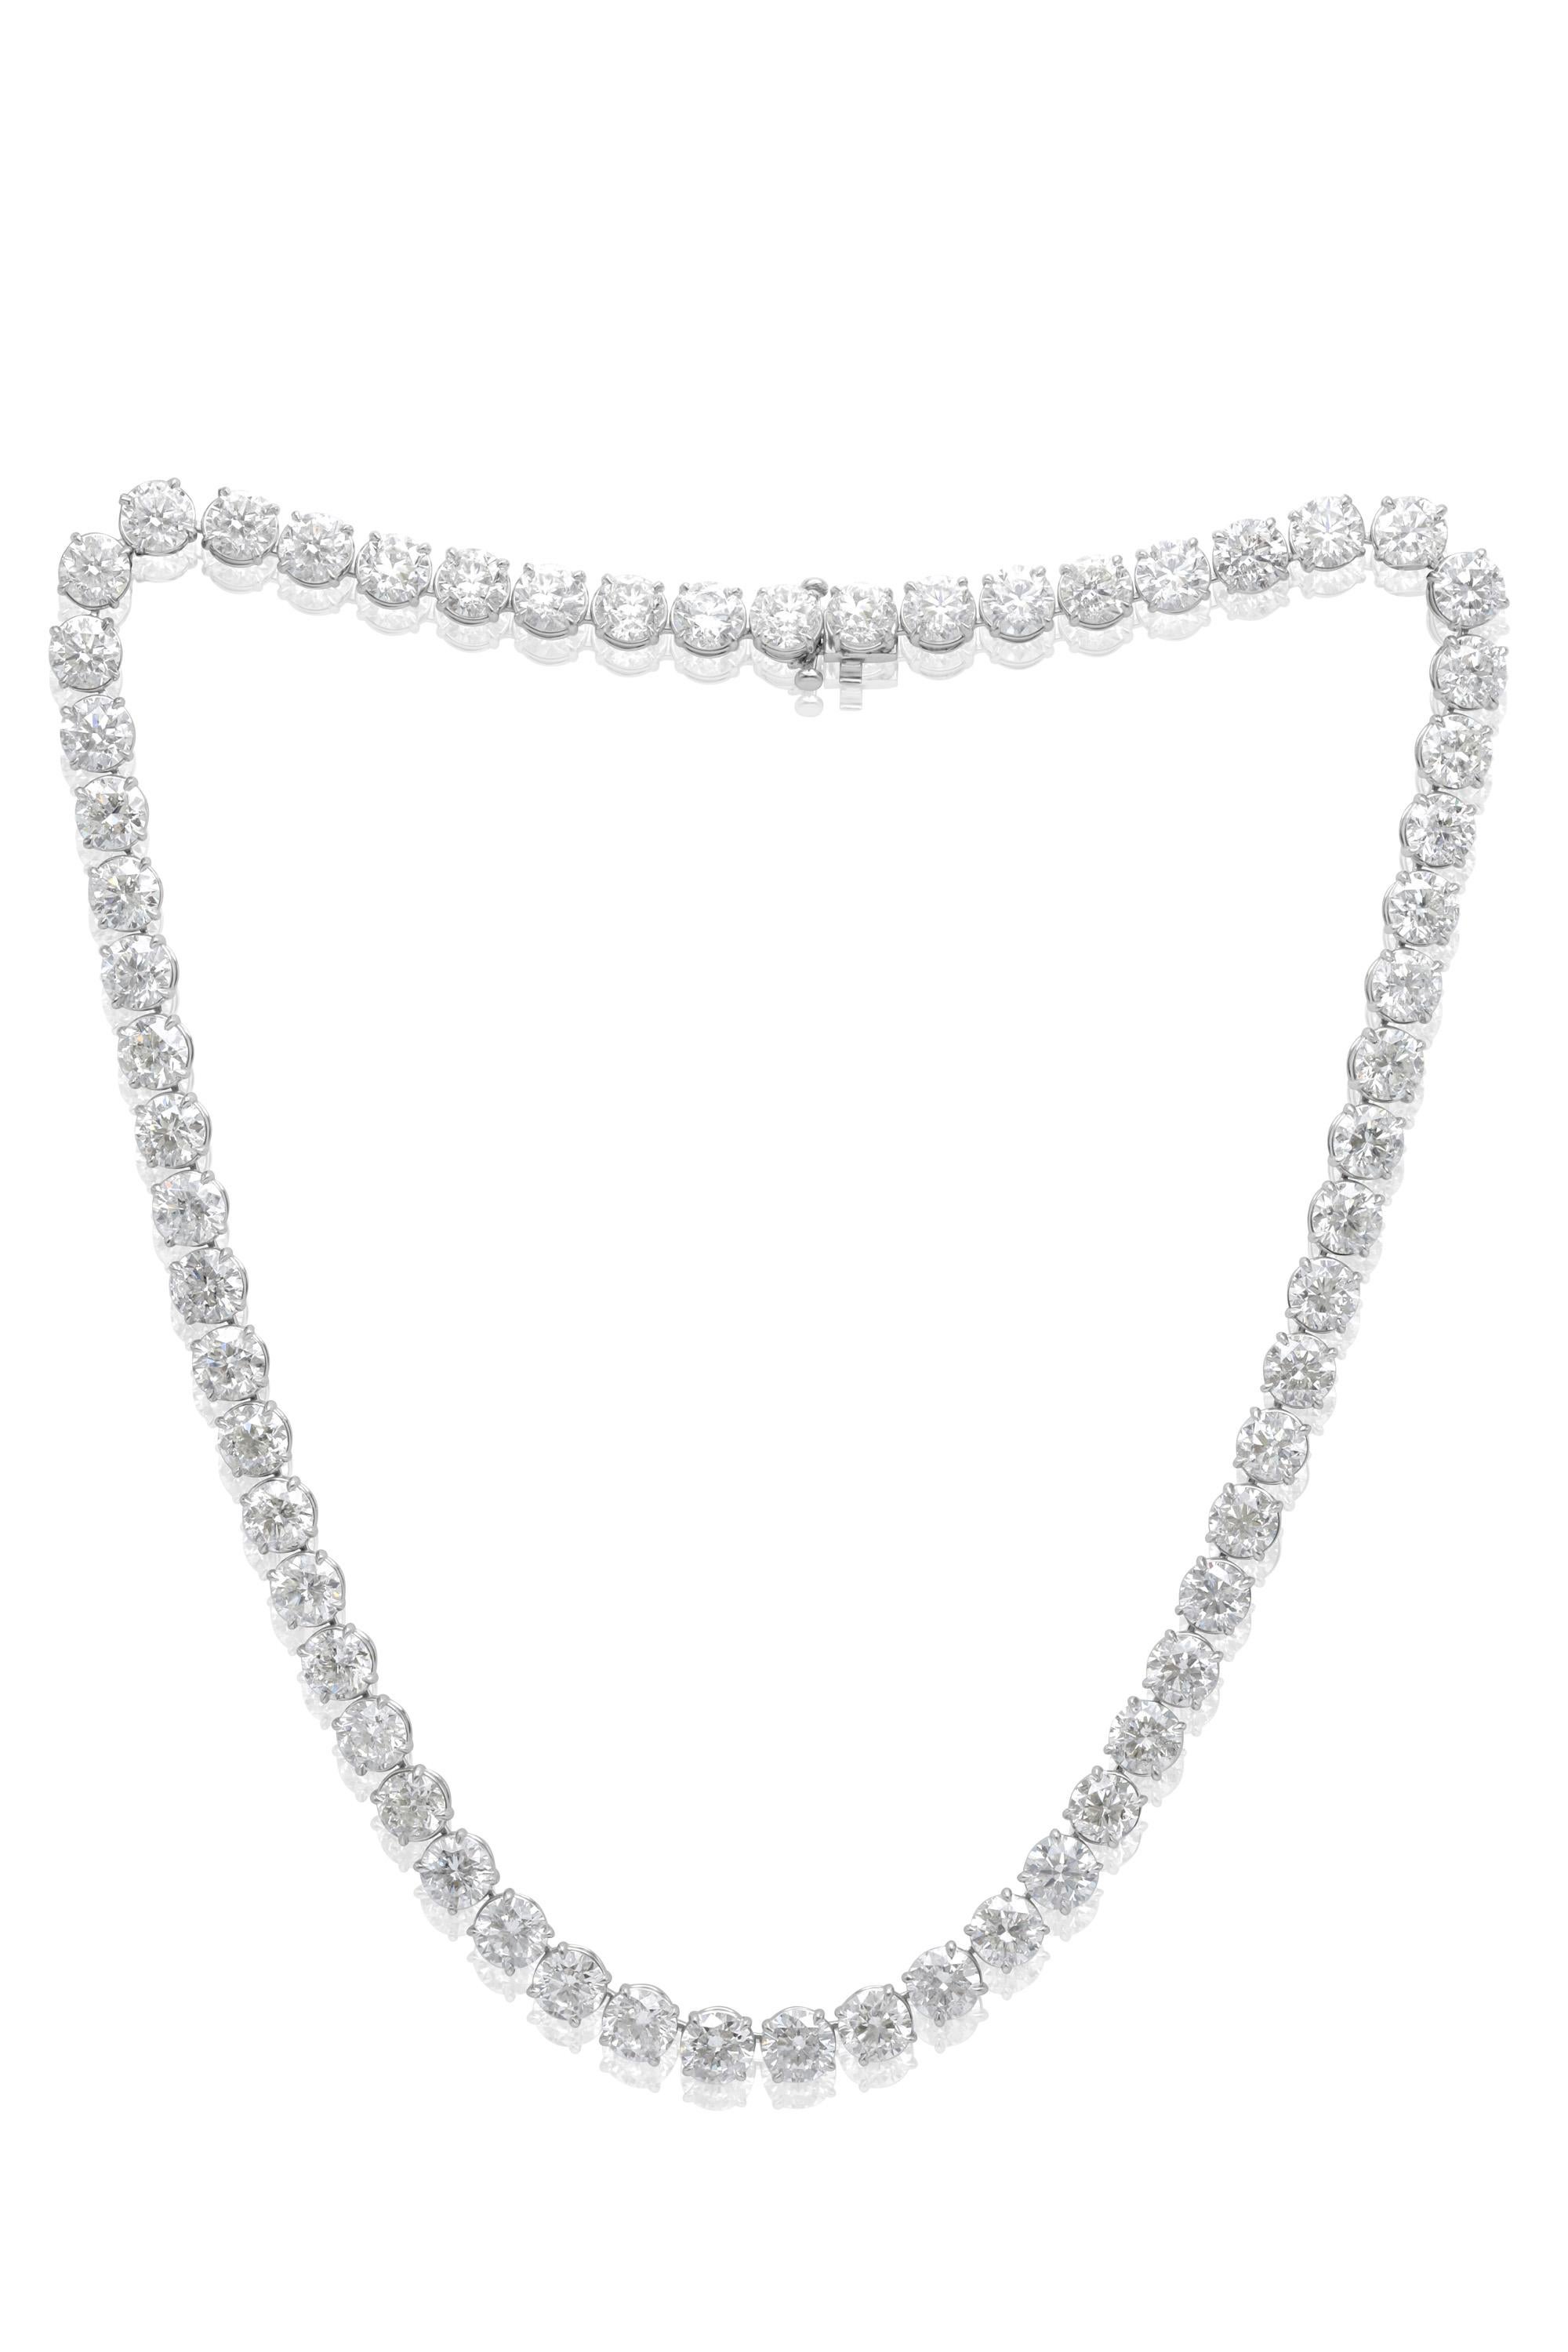 14K White Gold Diamond Straight Line Tennis Necklace Features 61.16Cts of Diamonds. 1ct each diamond 

Diana M. is a leading supplier of top-quality fine jewelry for over 35 years.
Diana M is one-stop shop for all your jewelry shopping, carrying